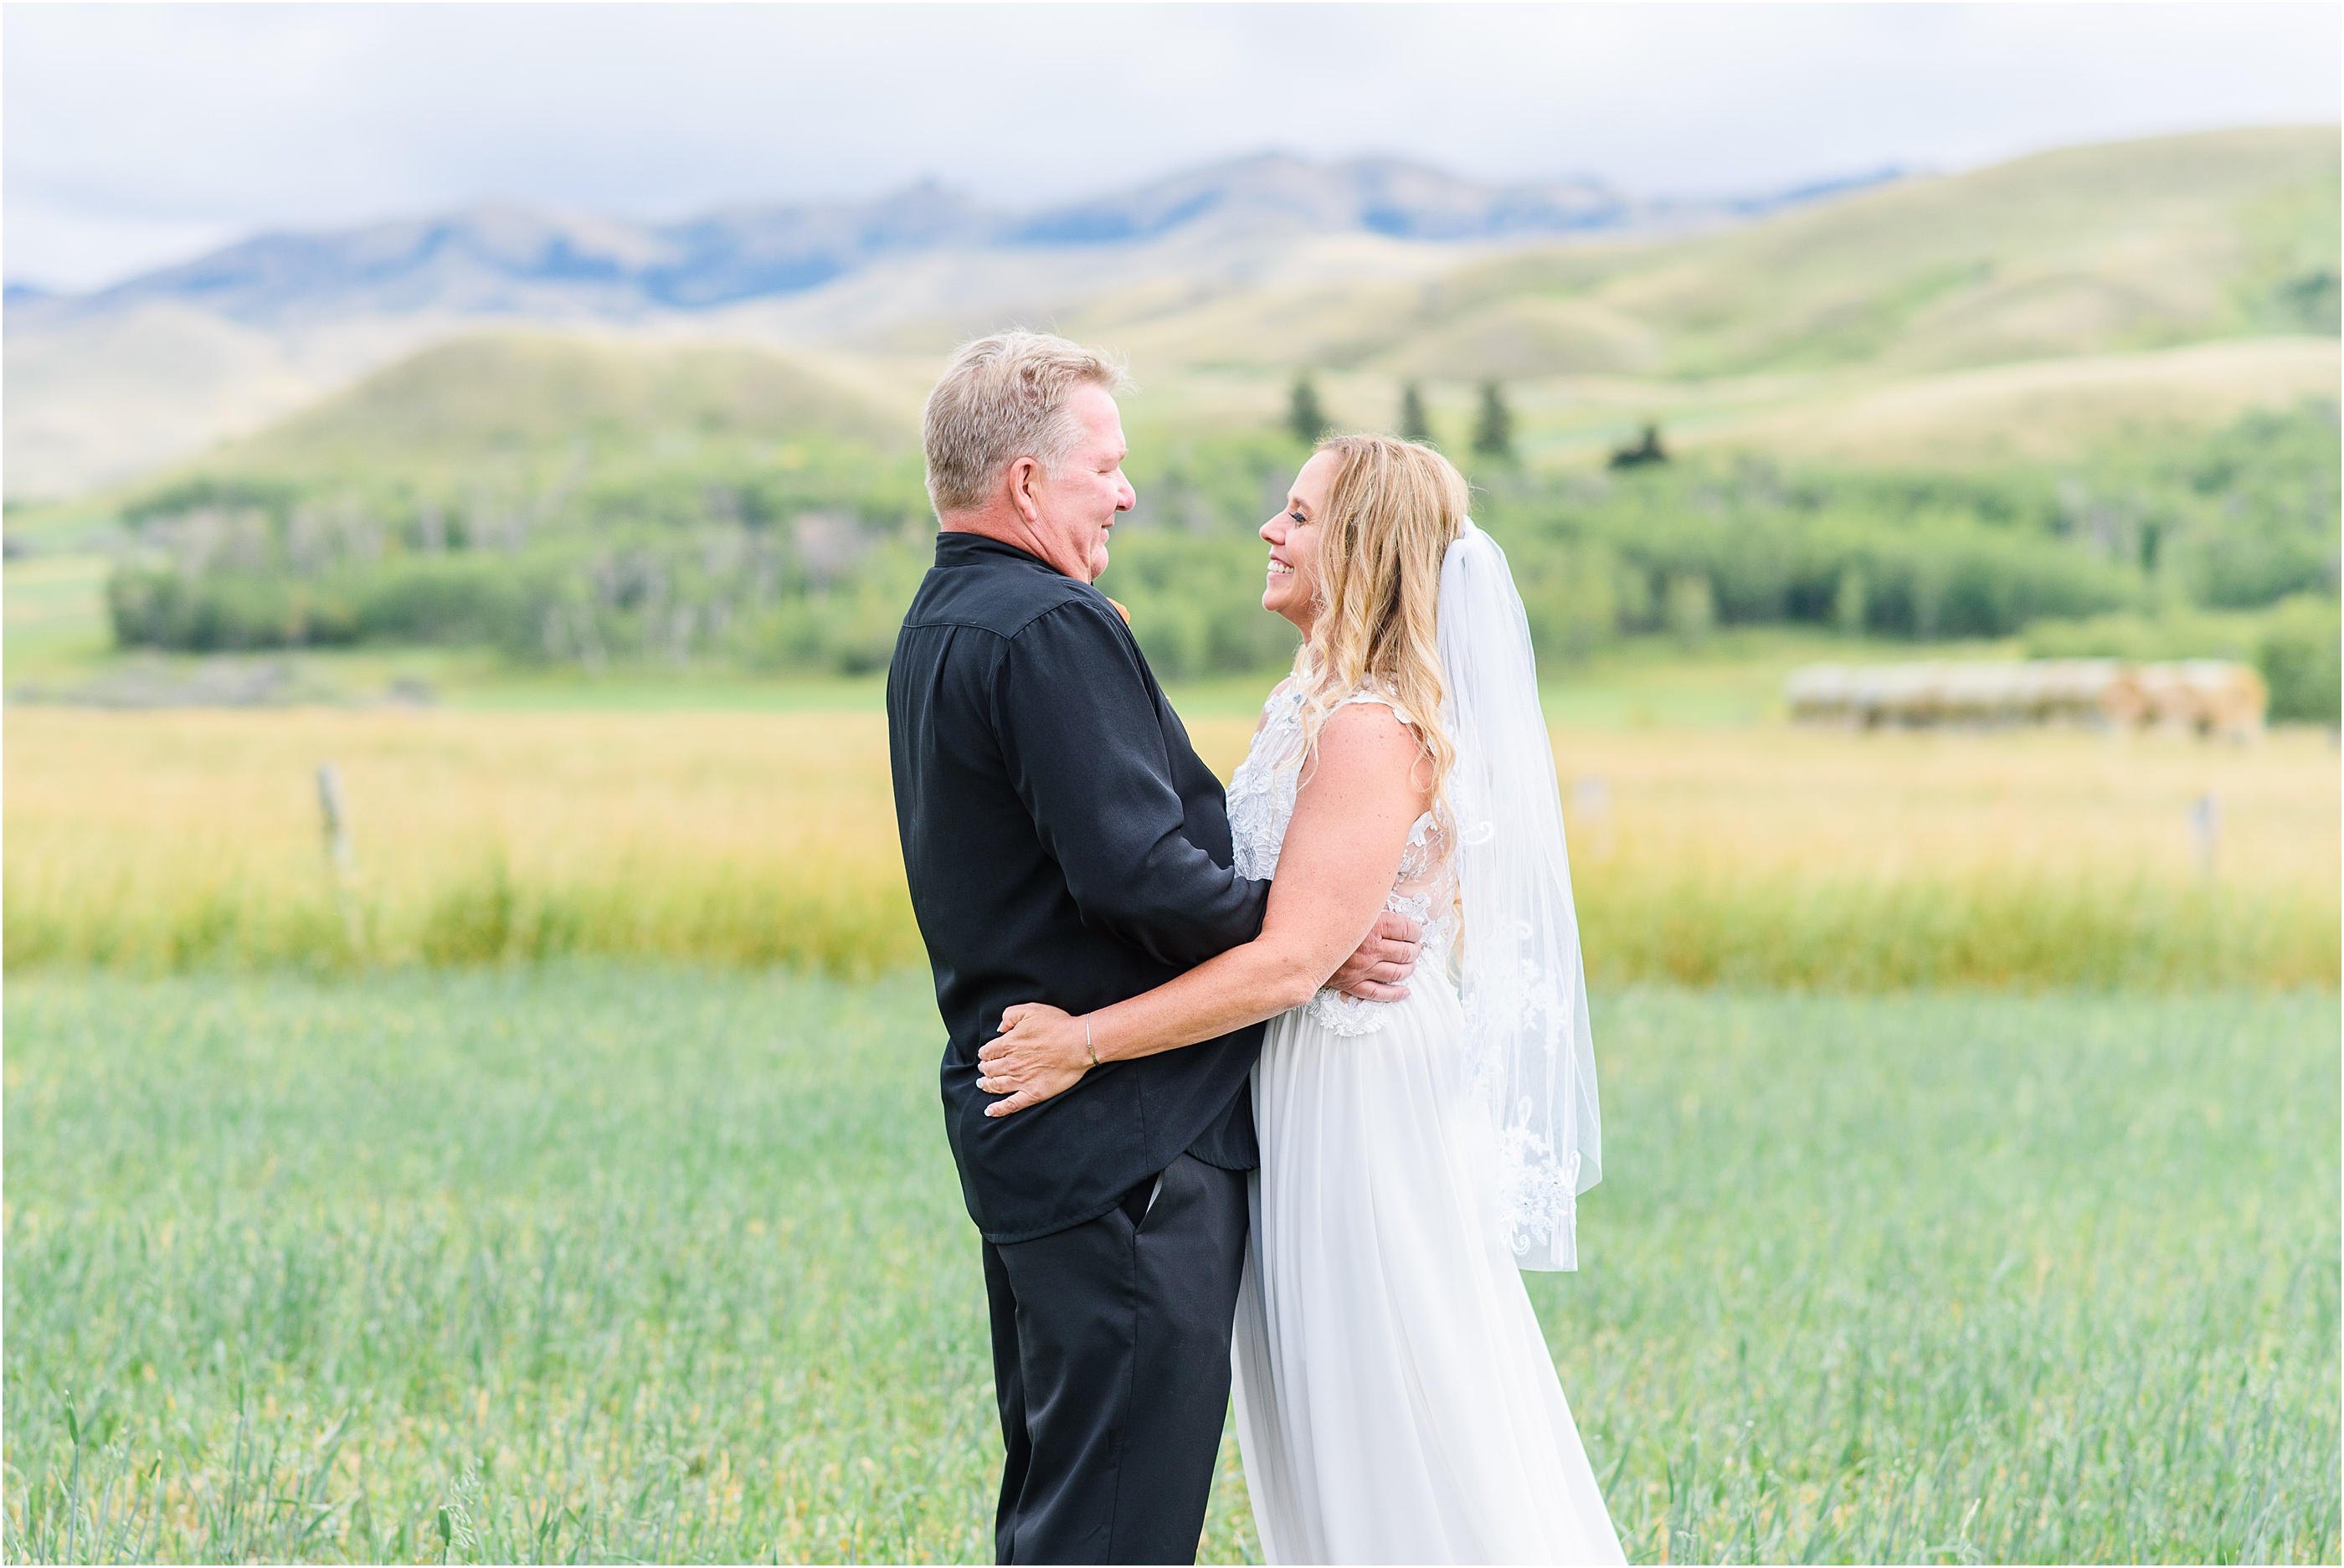 bride and groom taking portraits in mountain montana